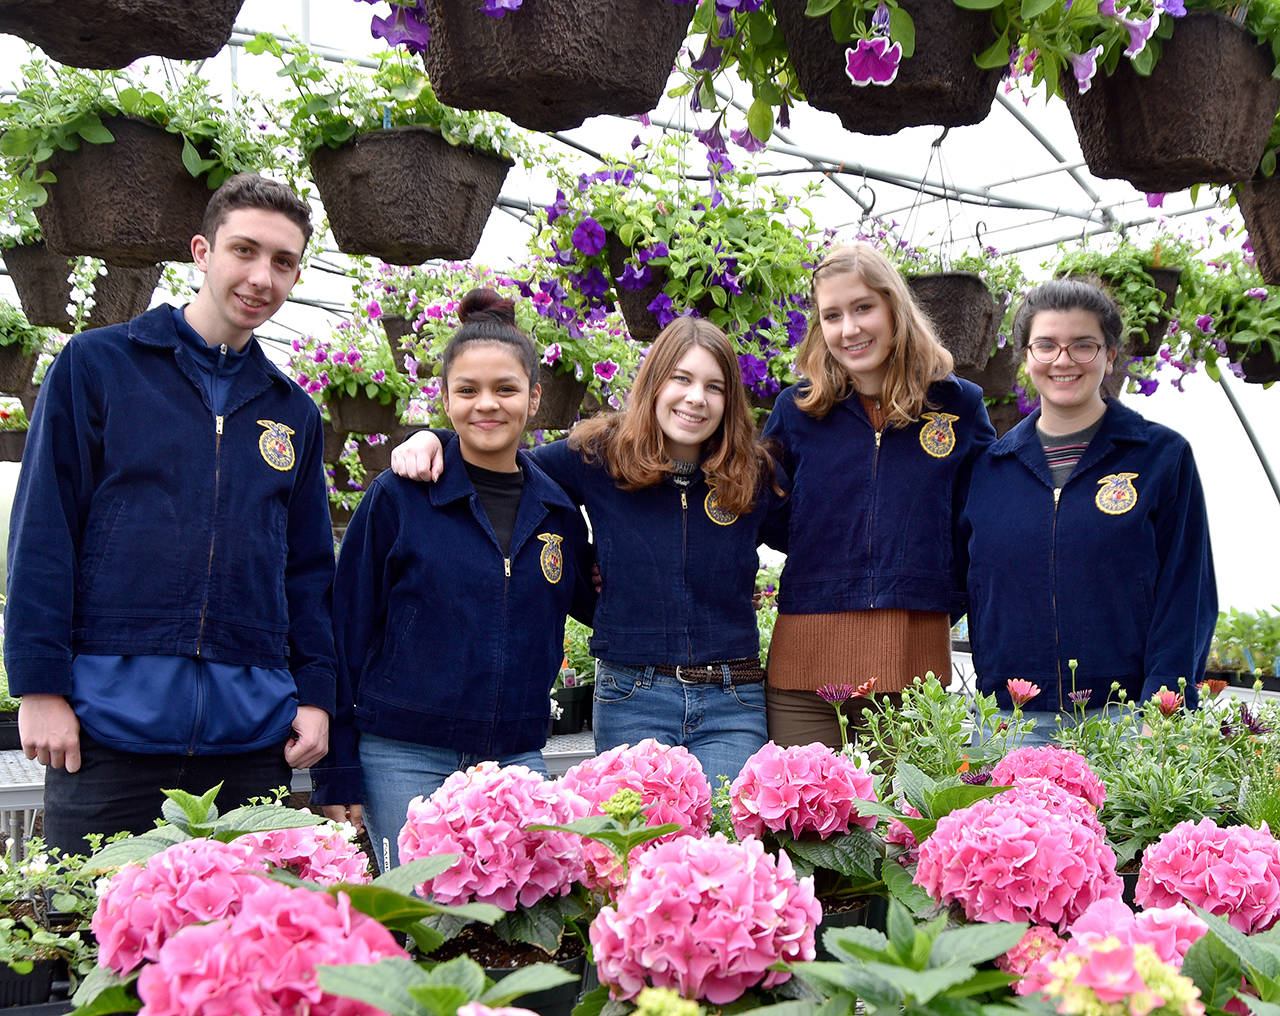 Carol Ladwig/Staff Photo                                Cedarcrest High School FFA members are preparing for their plant sale, starting this week with a preview party Thursday, followed by two weekends of sales, Fridays and Saturdays. Pictured from left are freshmen Calvin Leffard and Valeria Martinez, and seniors Nicole Hagens, club vice-president, Meg Knox, treasurer, and Zakya Misallati, chapter reporter.